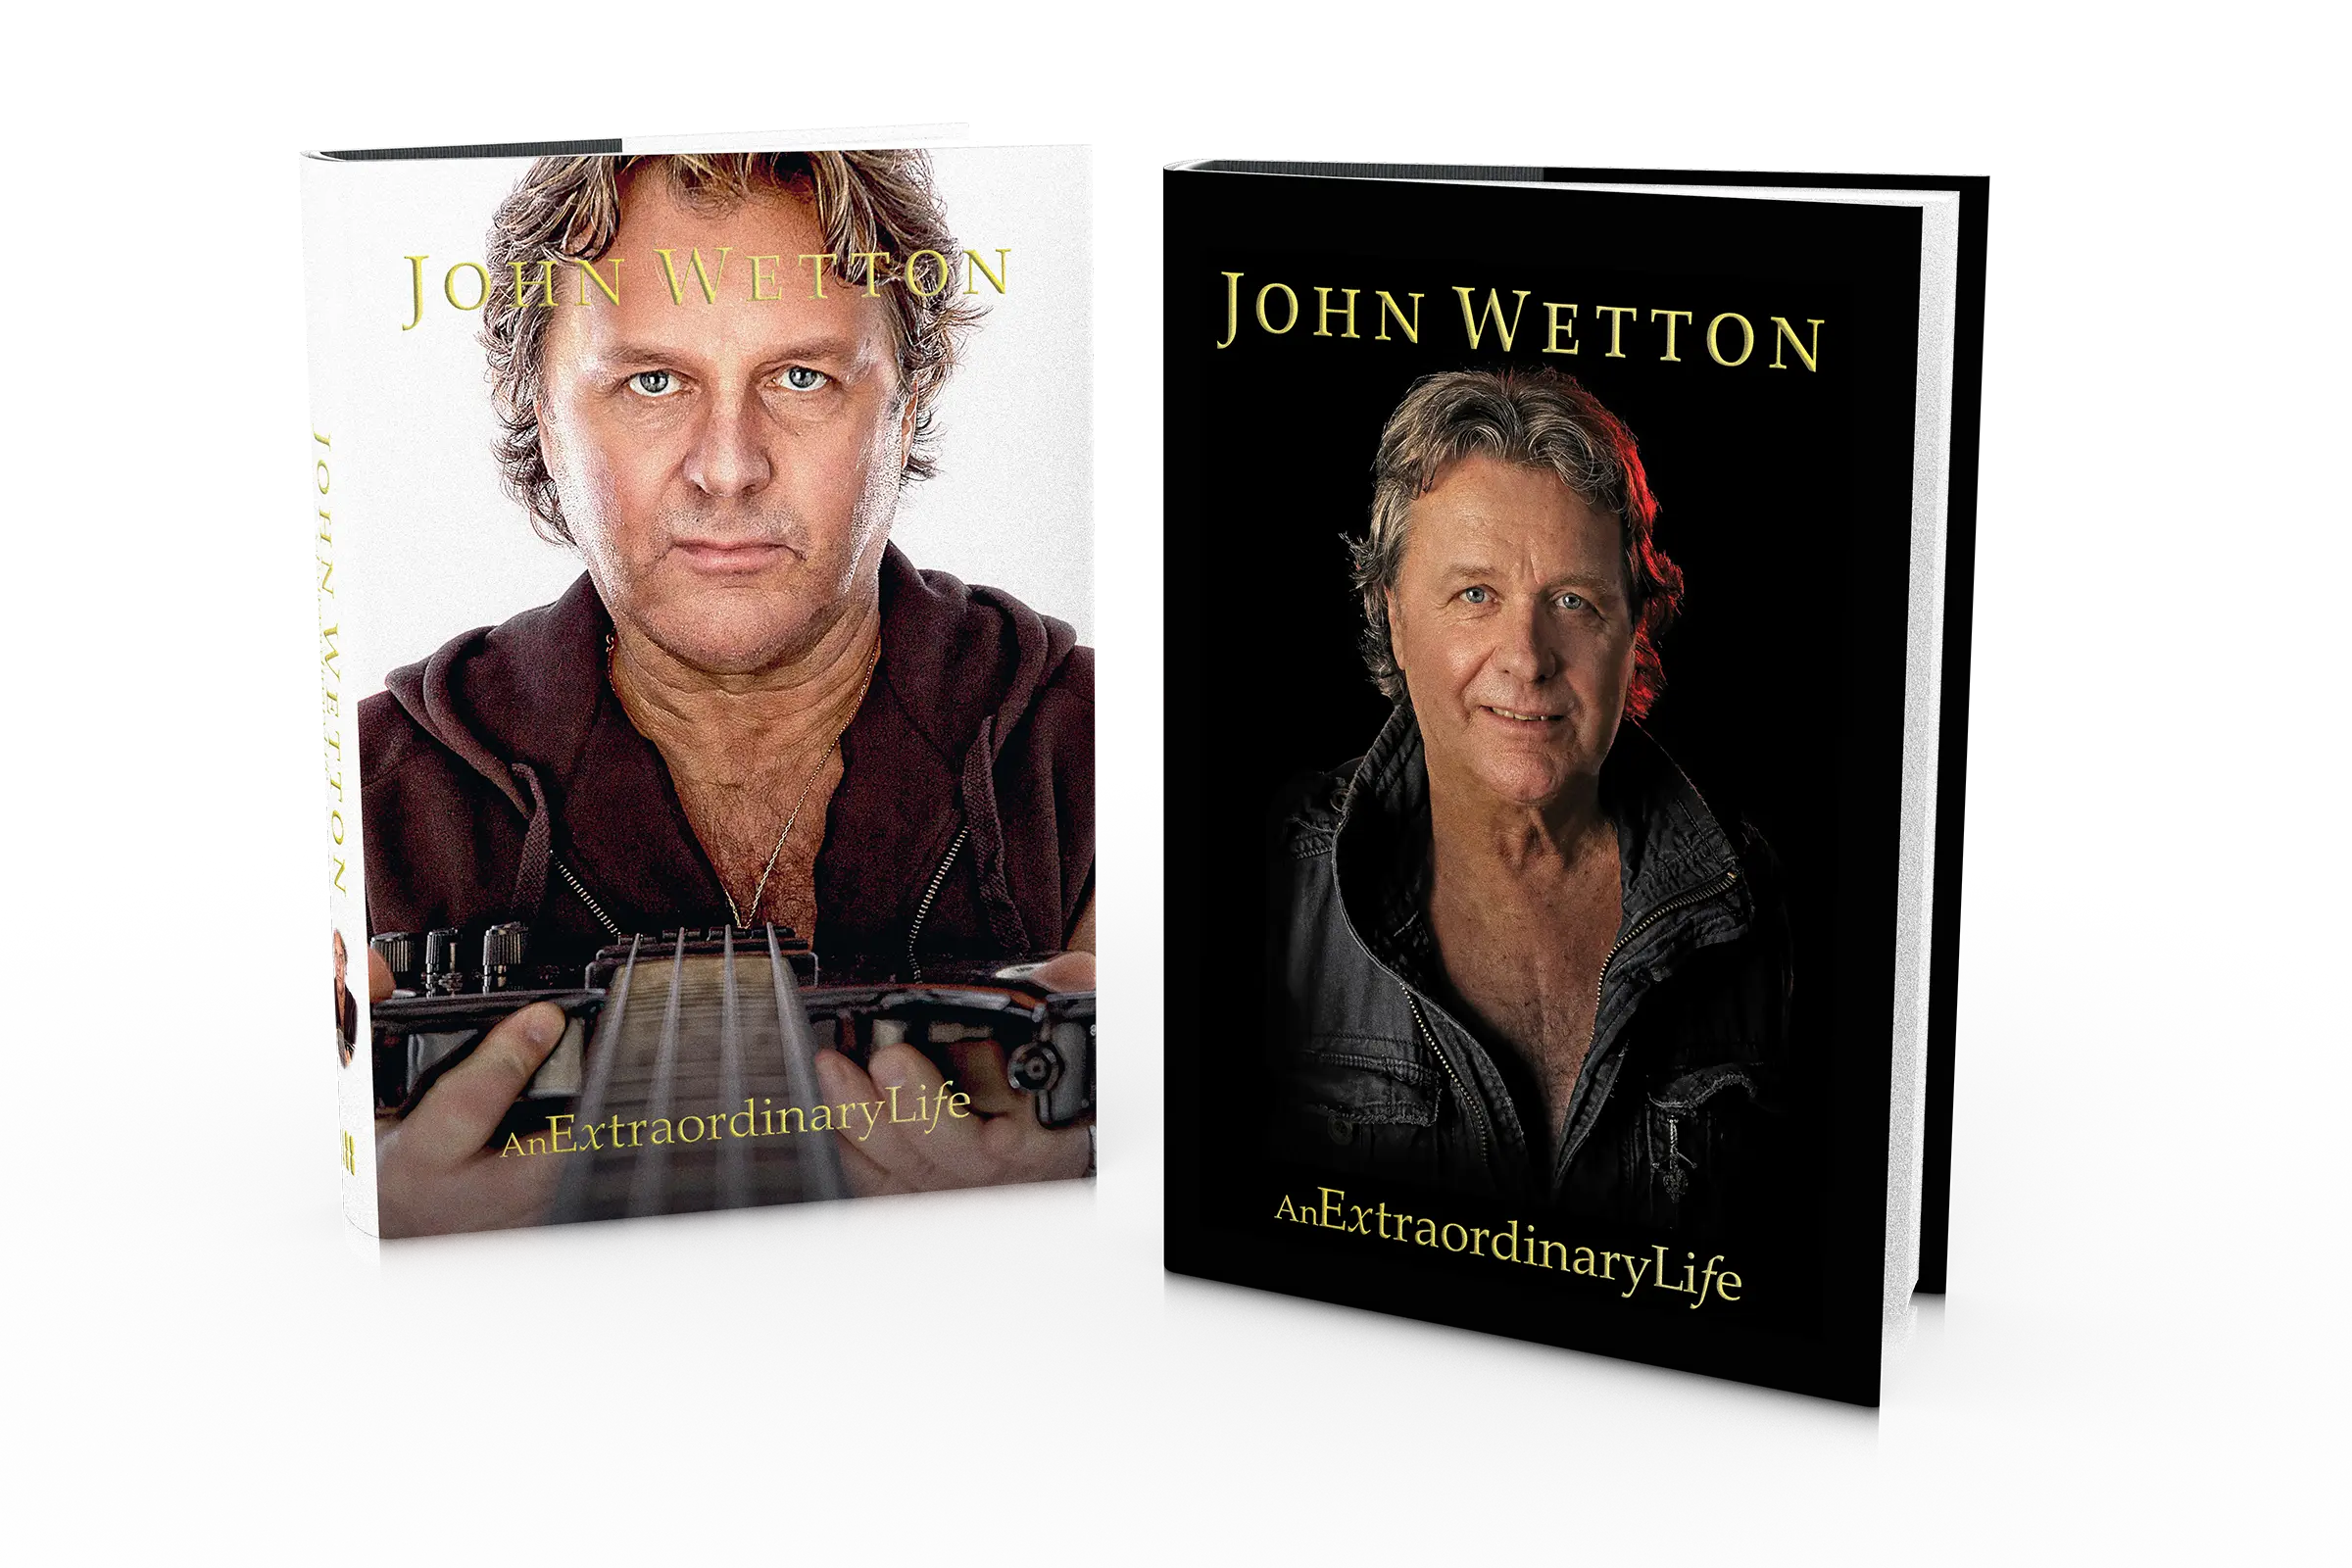 John Wetton An Extraordinary Life, published by Rocket 88